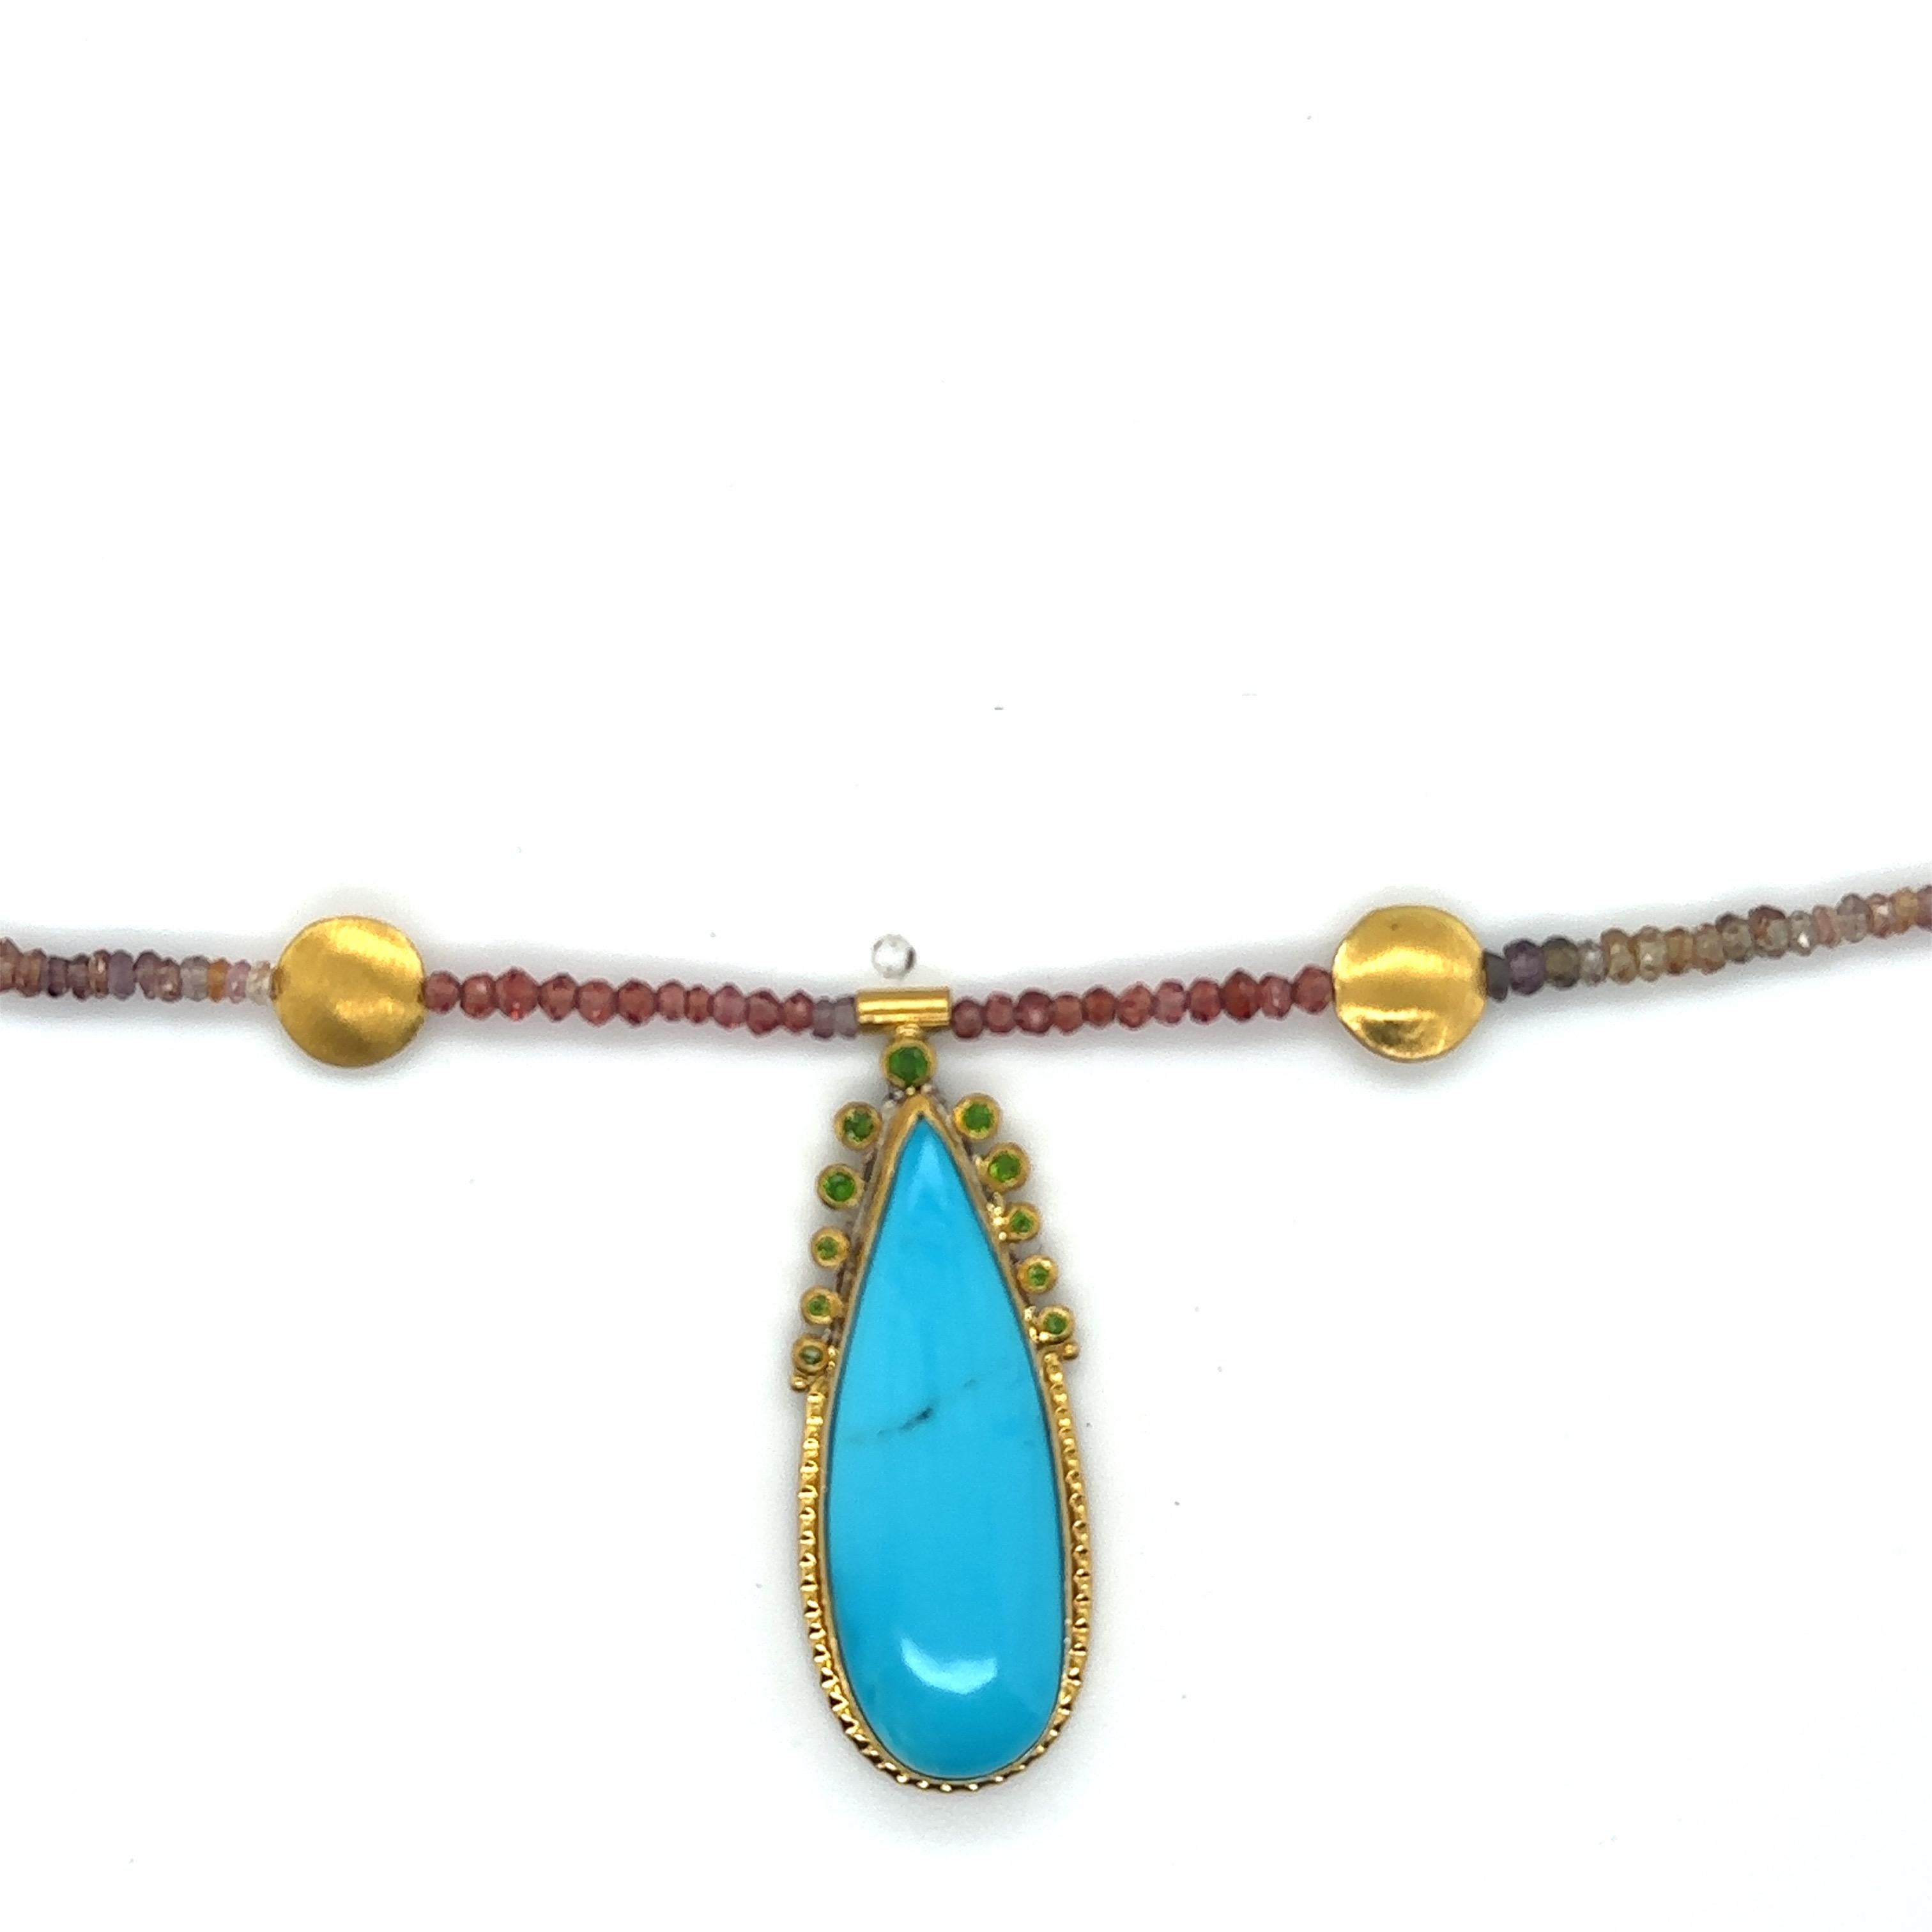 Women's JAS-19-1845 - 24K GOLD/STERLING SILVER w KINGMAN TURQUOISE & MULTI COLOR BEADS For Sale